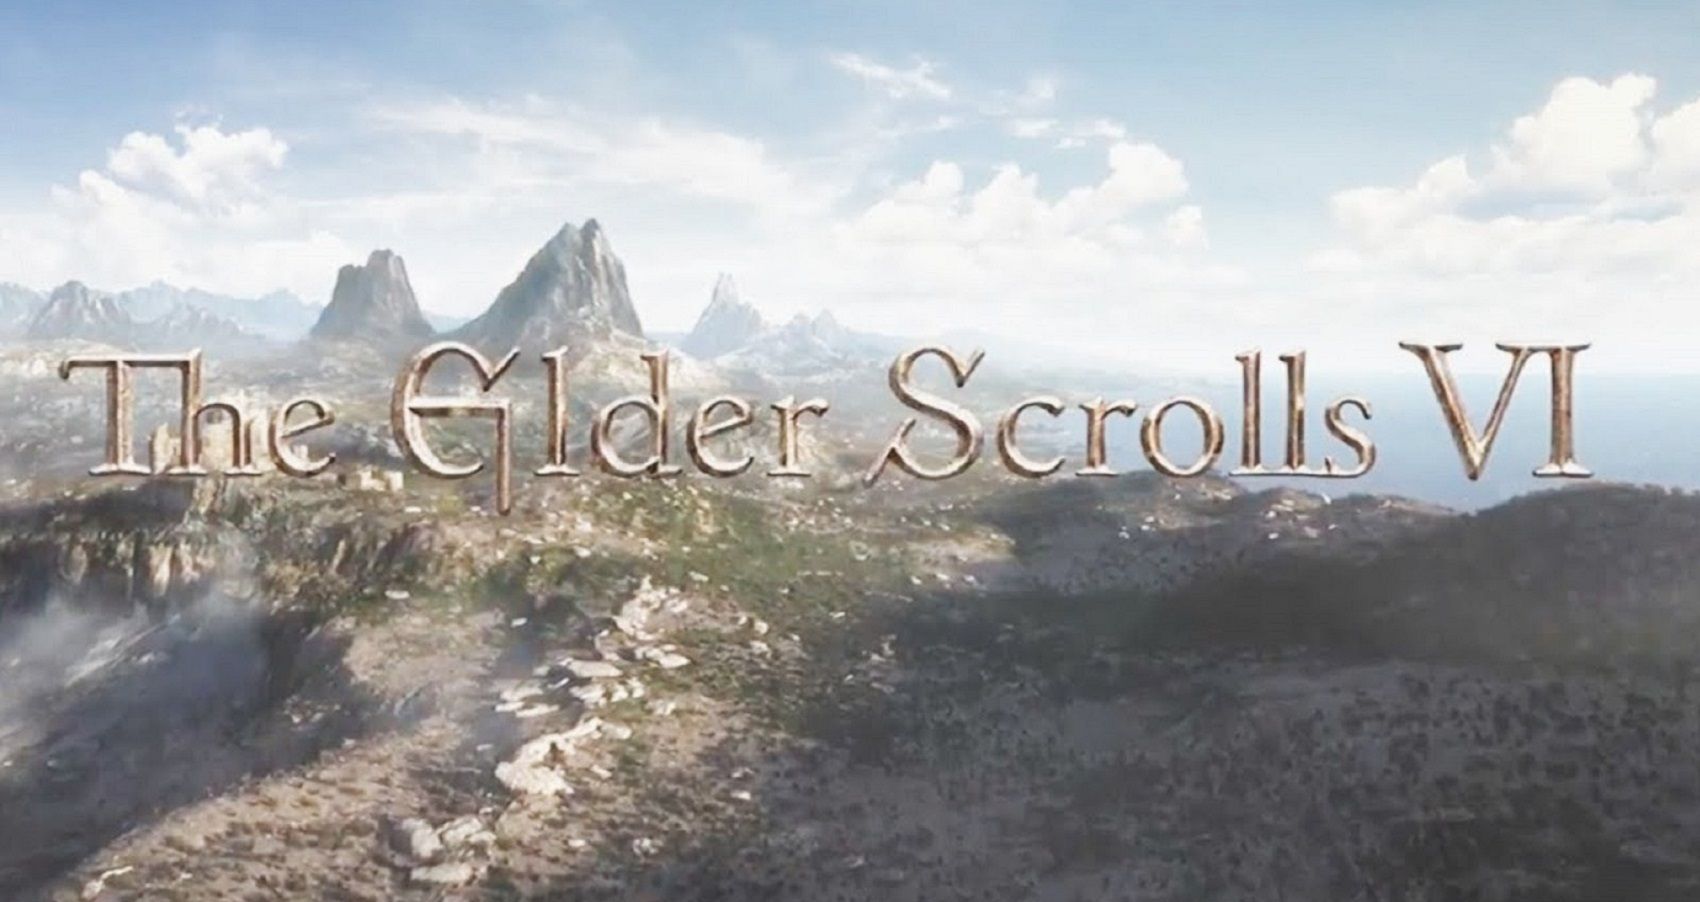 Elder Scrolls 6 release date may be with UK gov, but it's not telling